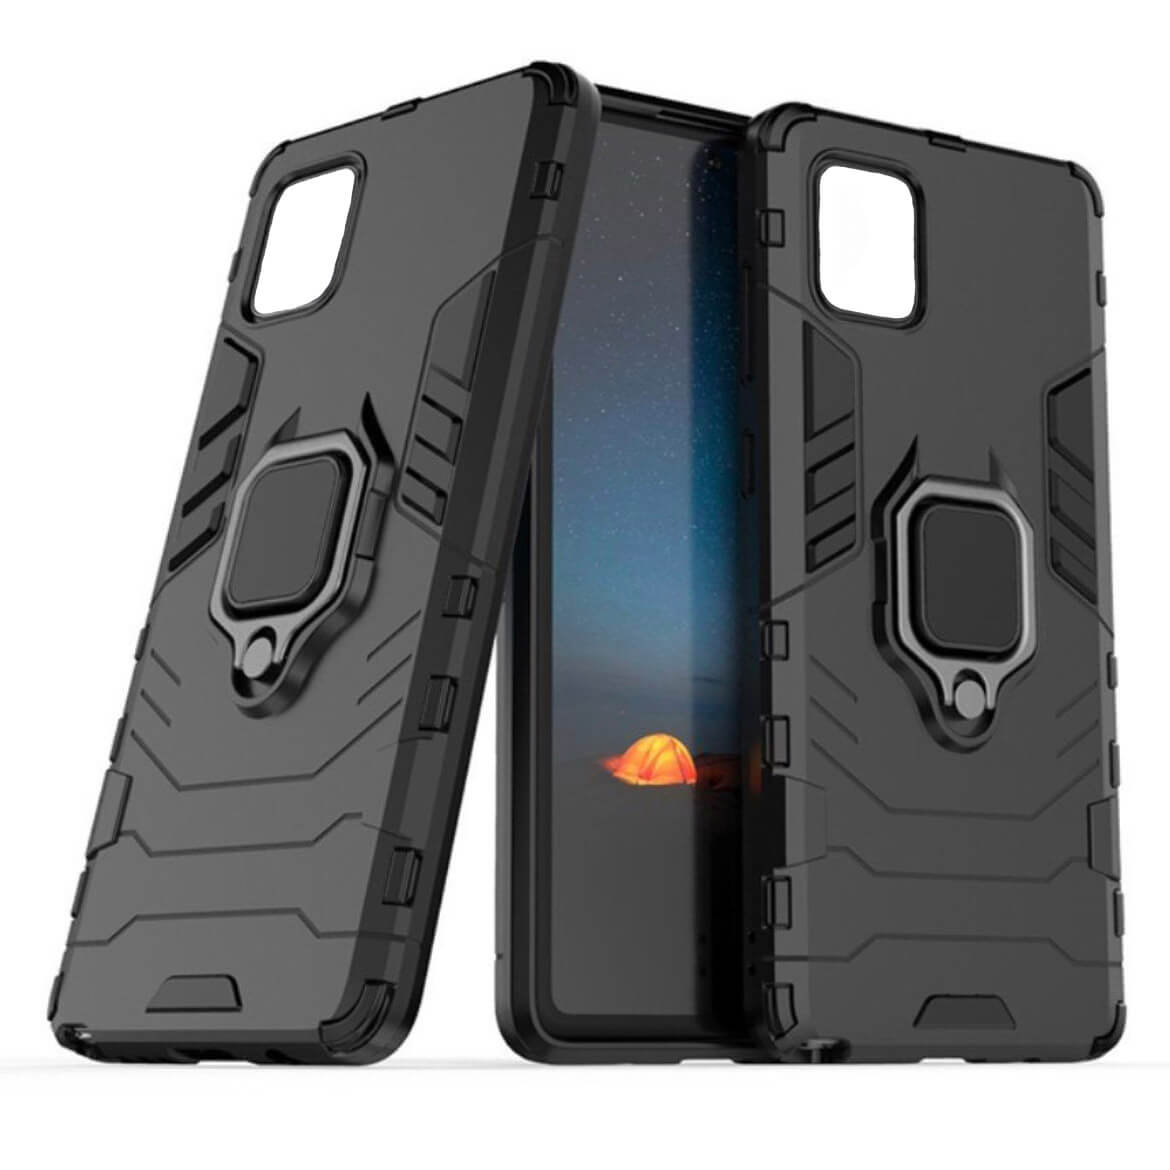 For Samsung Galaxy Note 10 Lite Luxury Armor Case Shockproof Cover Magnet Ring Holder - Black